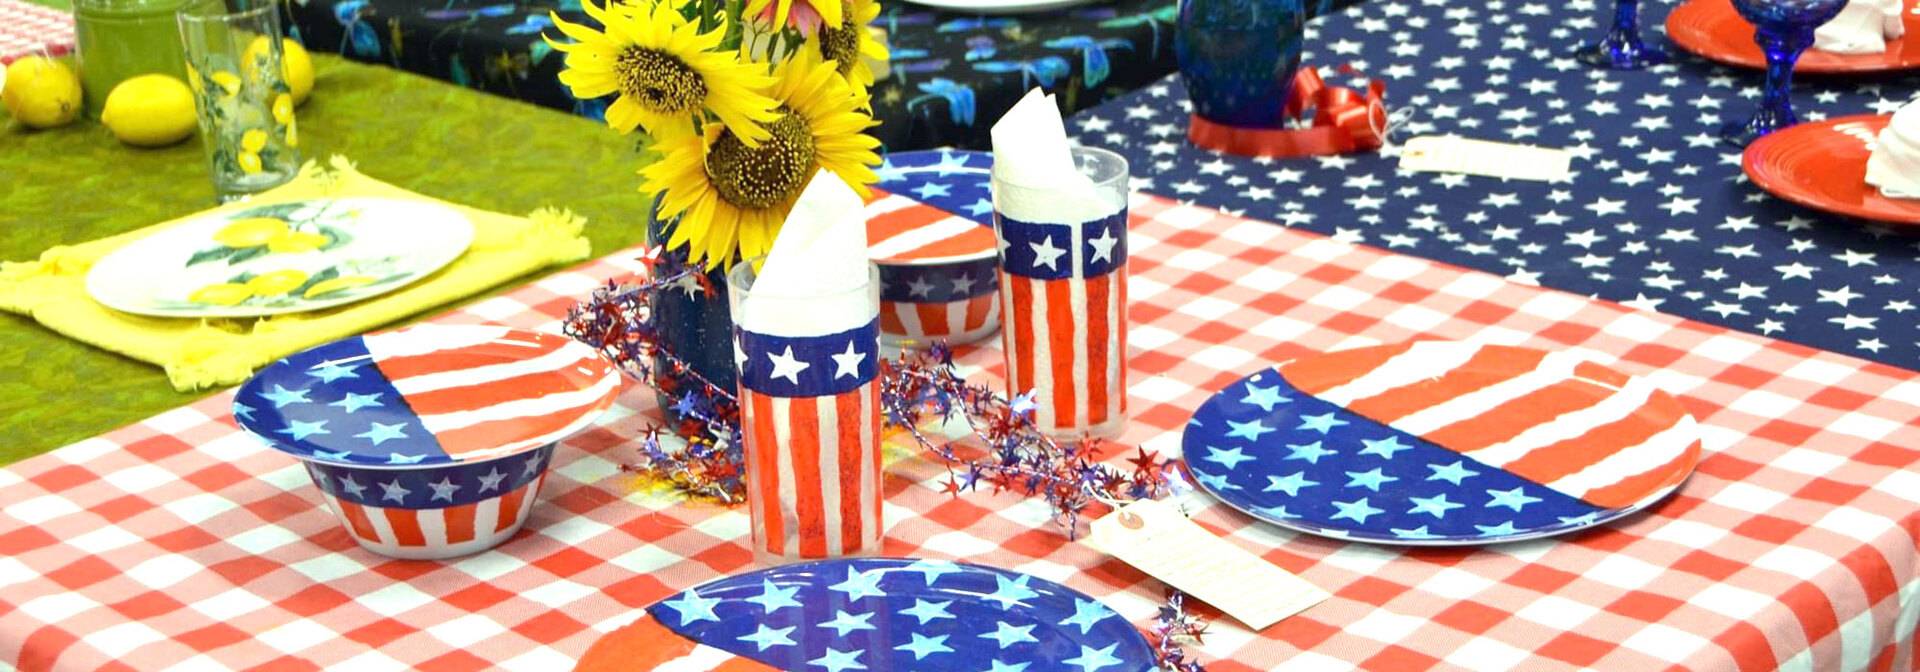 Patriotic table setting with red & white checkered tablecloth and plates and cups with American flag pattern